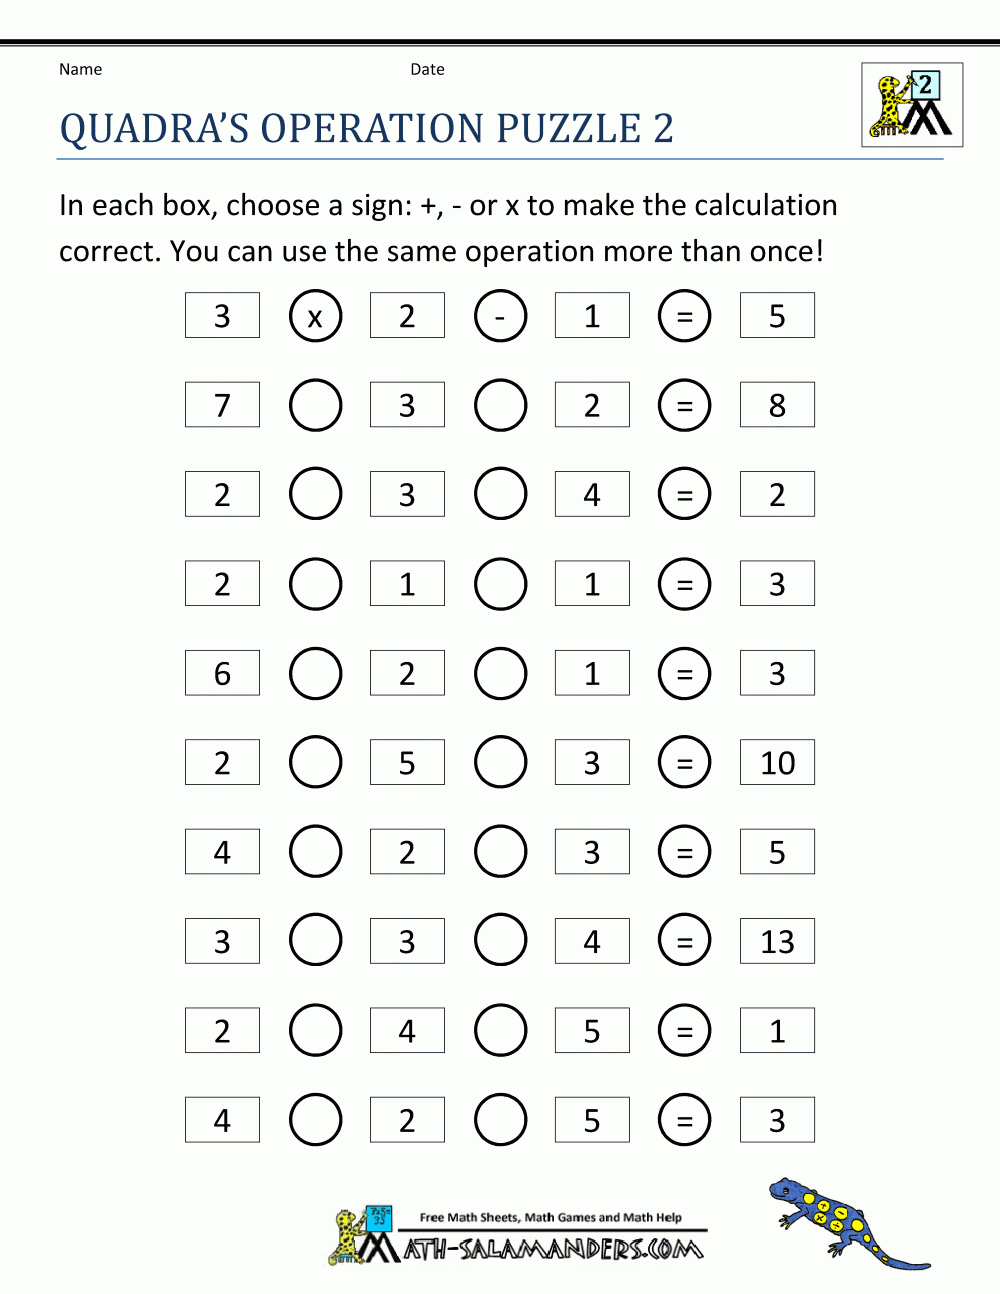 Math Puzzle Quadras Operation Puzzle 2 | Maths | Maths Puzzles, 3Rd - Printable Math Puzzles For 8Th Graders